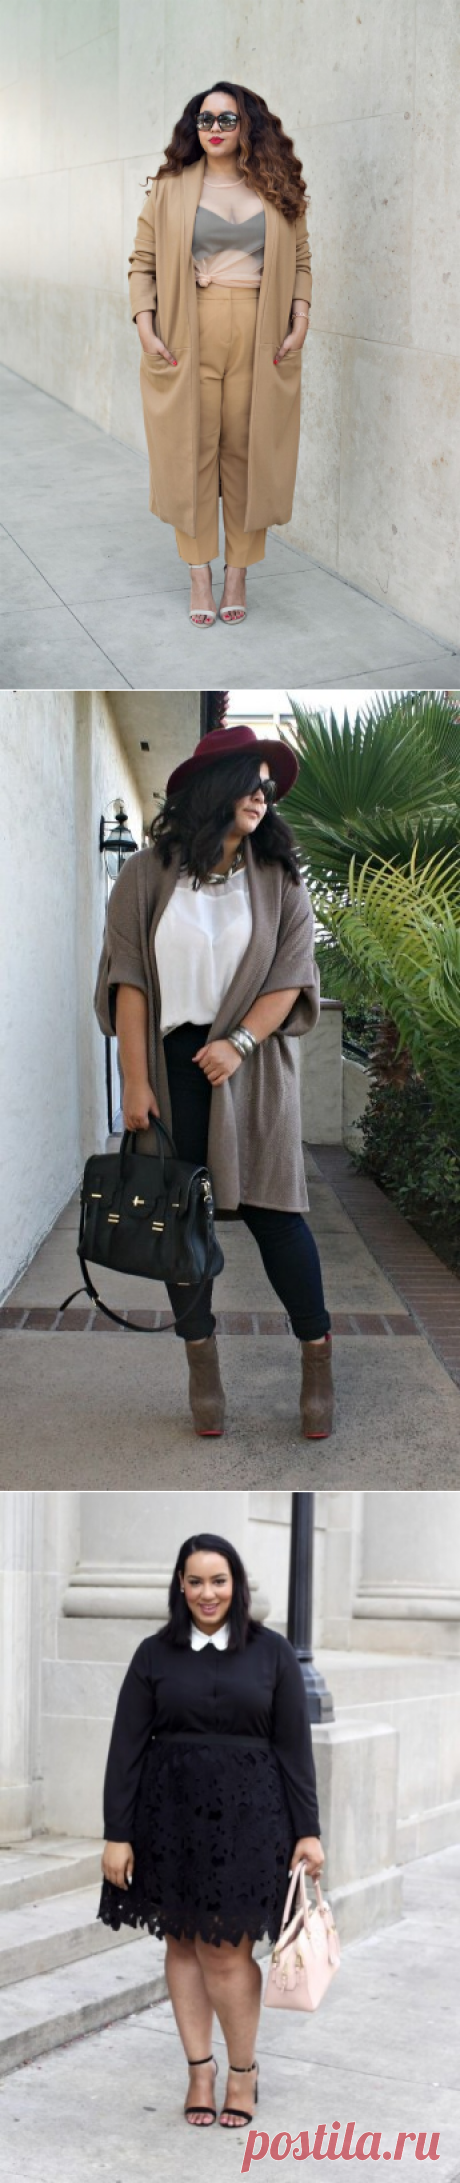 Stop Complaining and Be Confident, These Are Stylish Outfit Ideas for Plus Size &amp;ndash; Ferbena.com